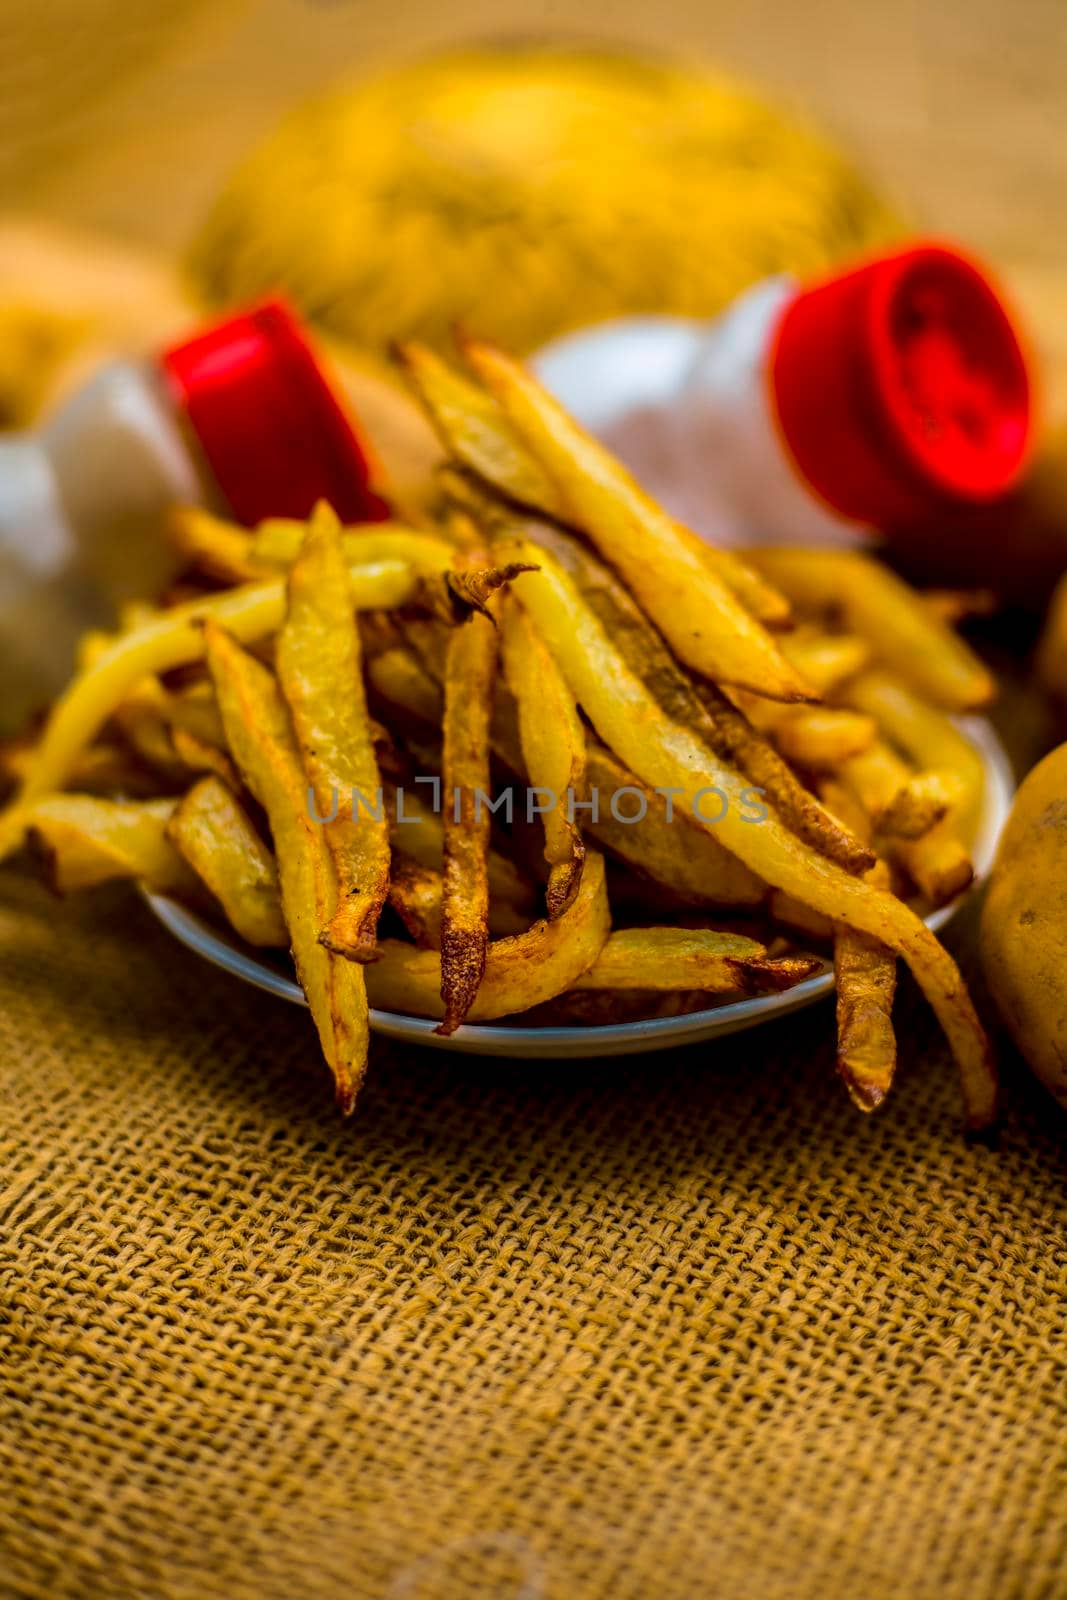 Fresh fired French fries of along with sprinkler of black pepper and salt on jute bag's surface and some raw potato also.